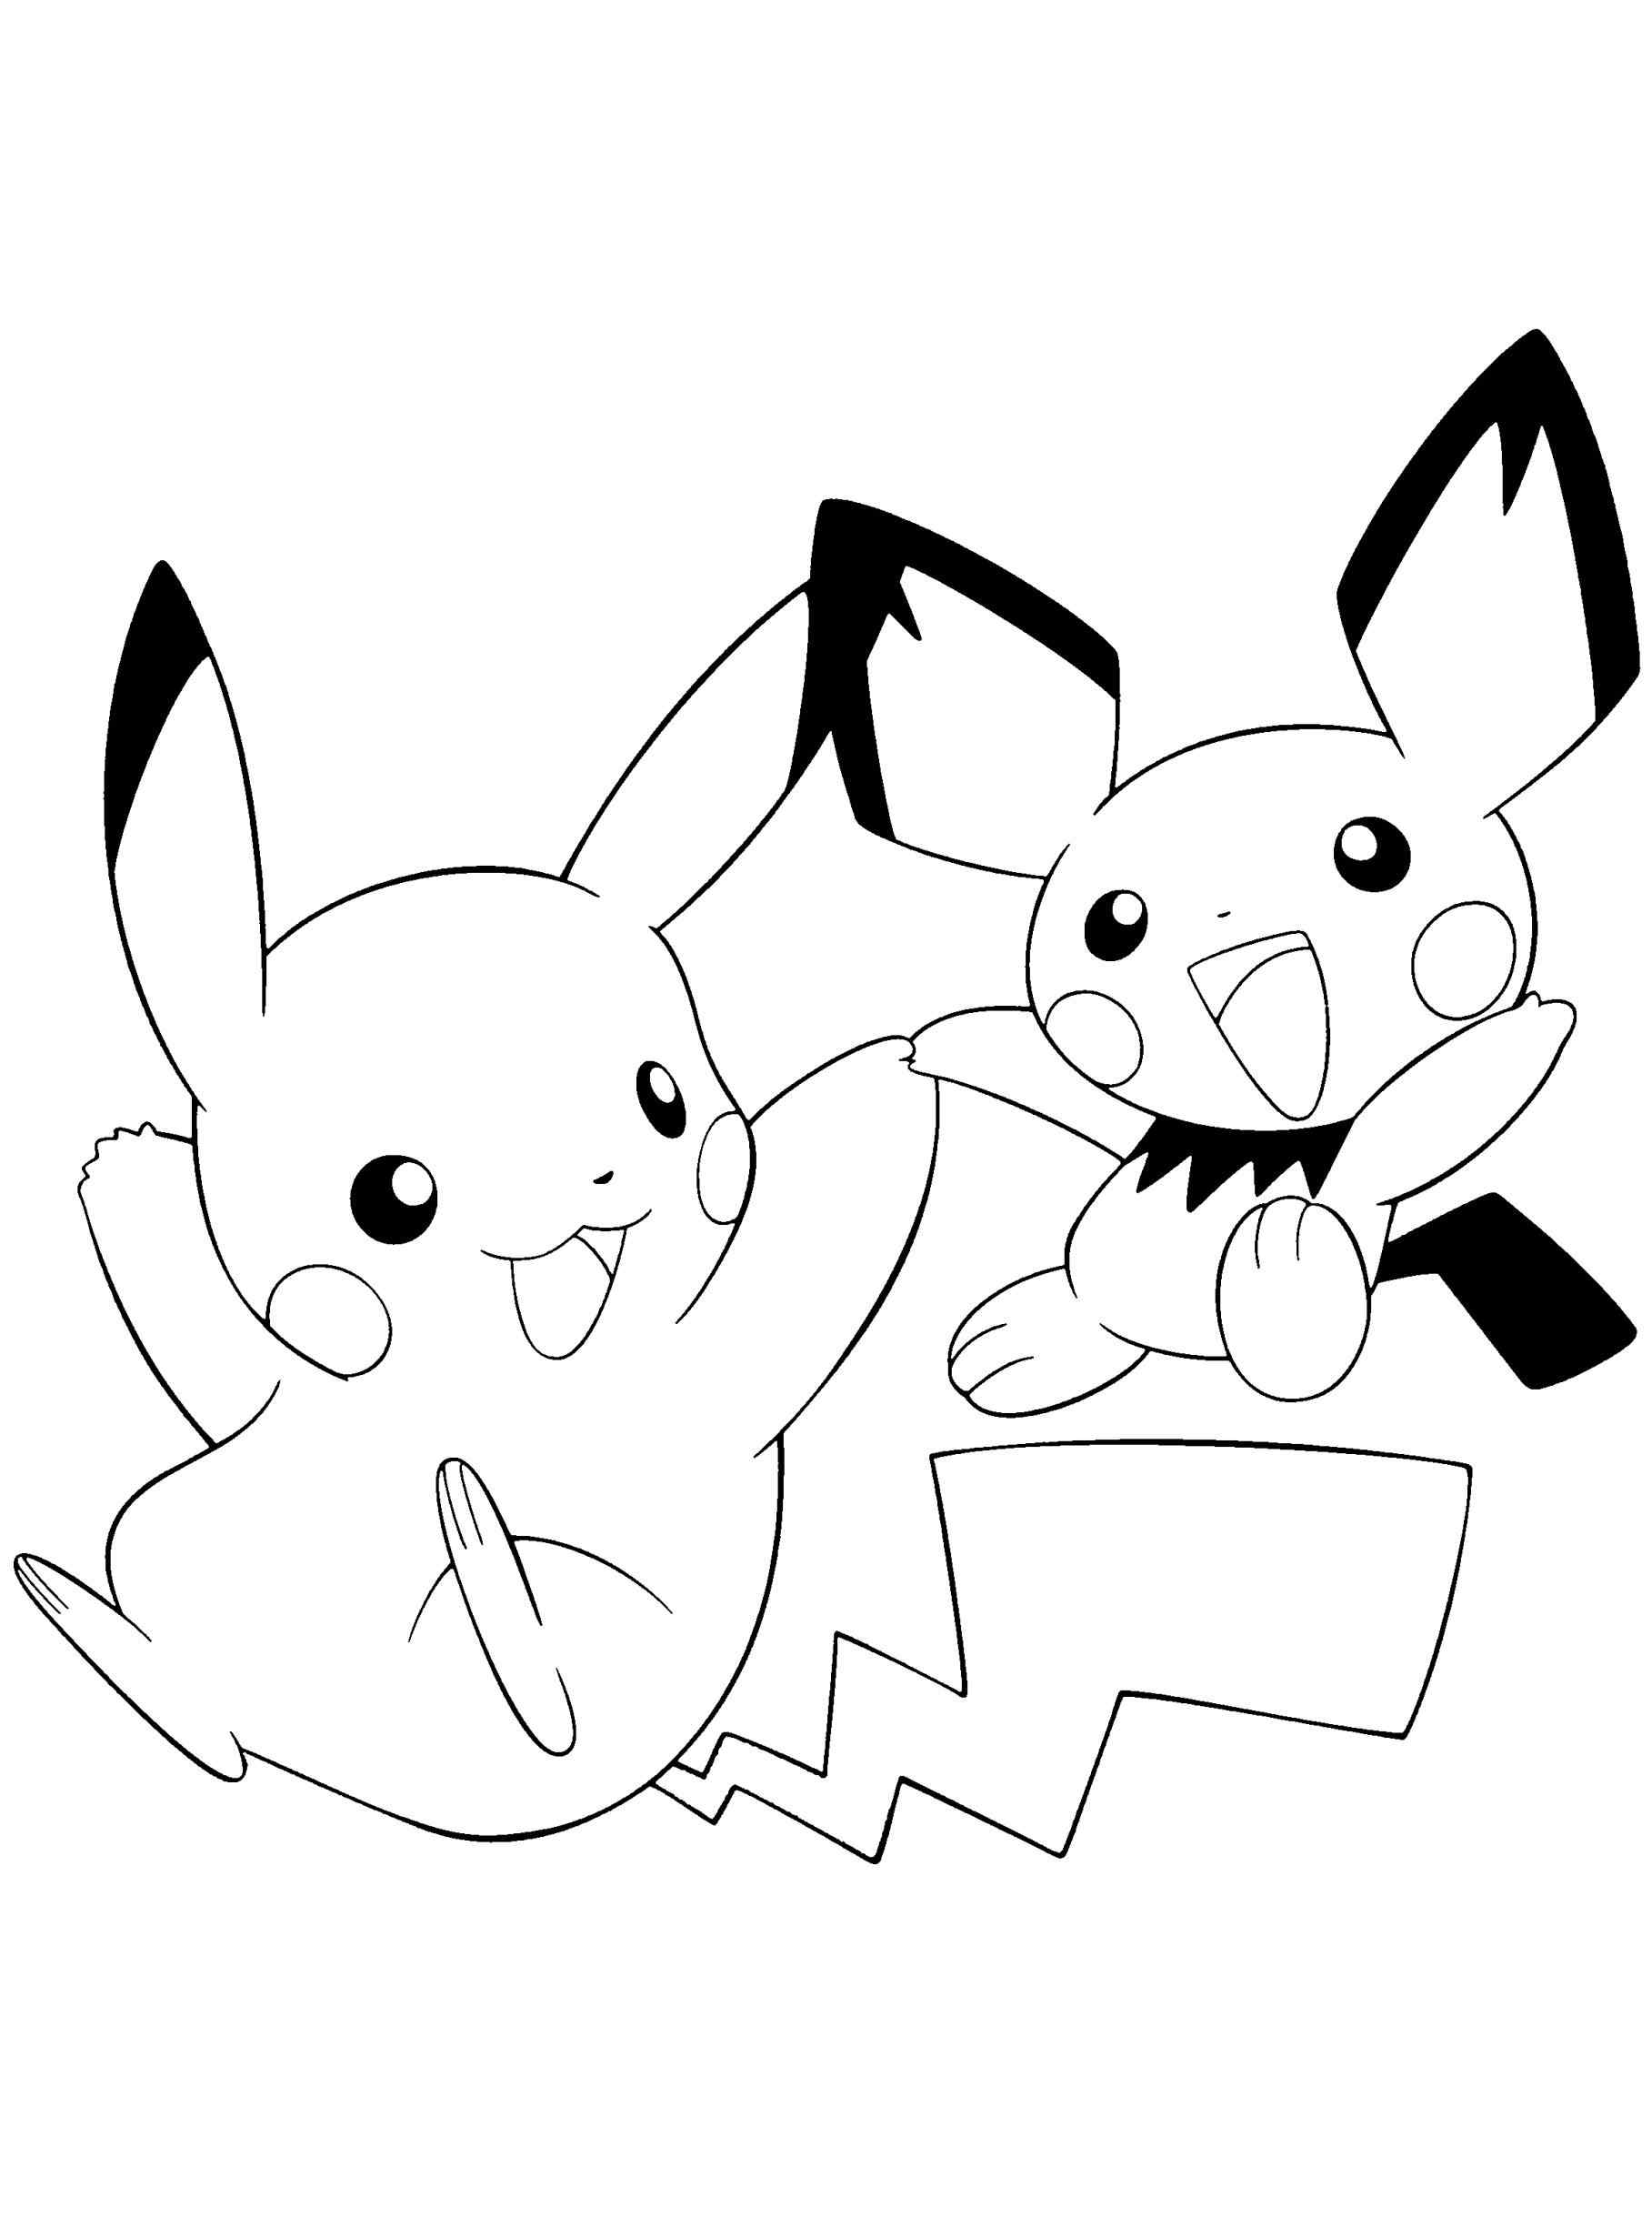 Cute Pikachu Coloring Pages at GetDrawings Free download